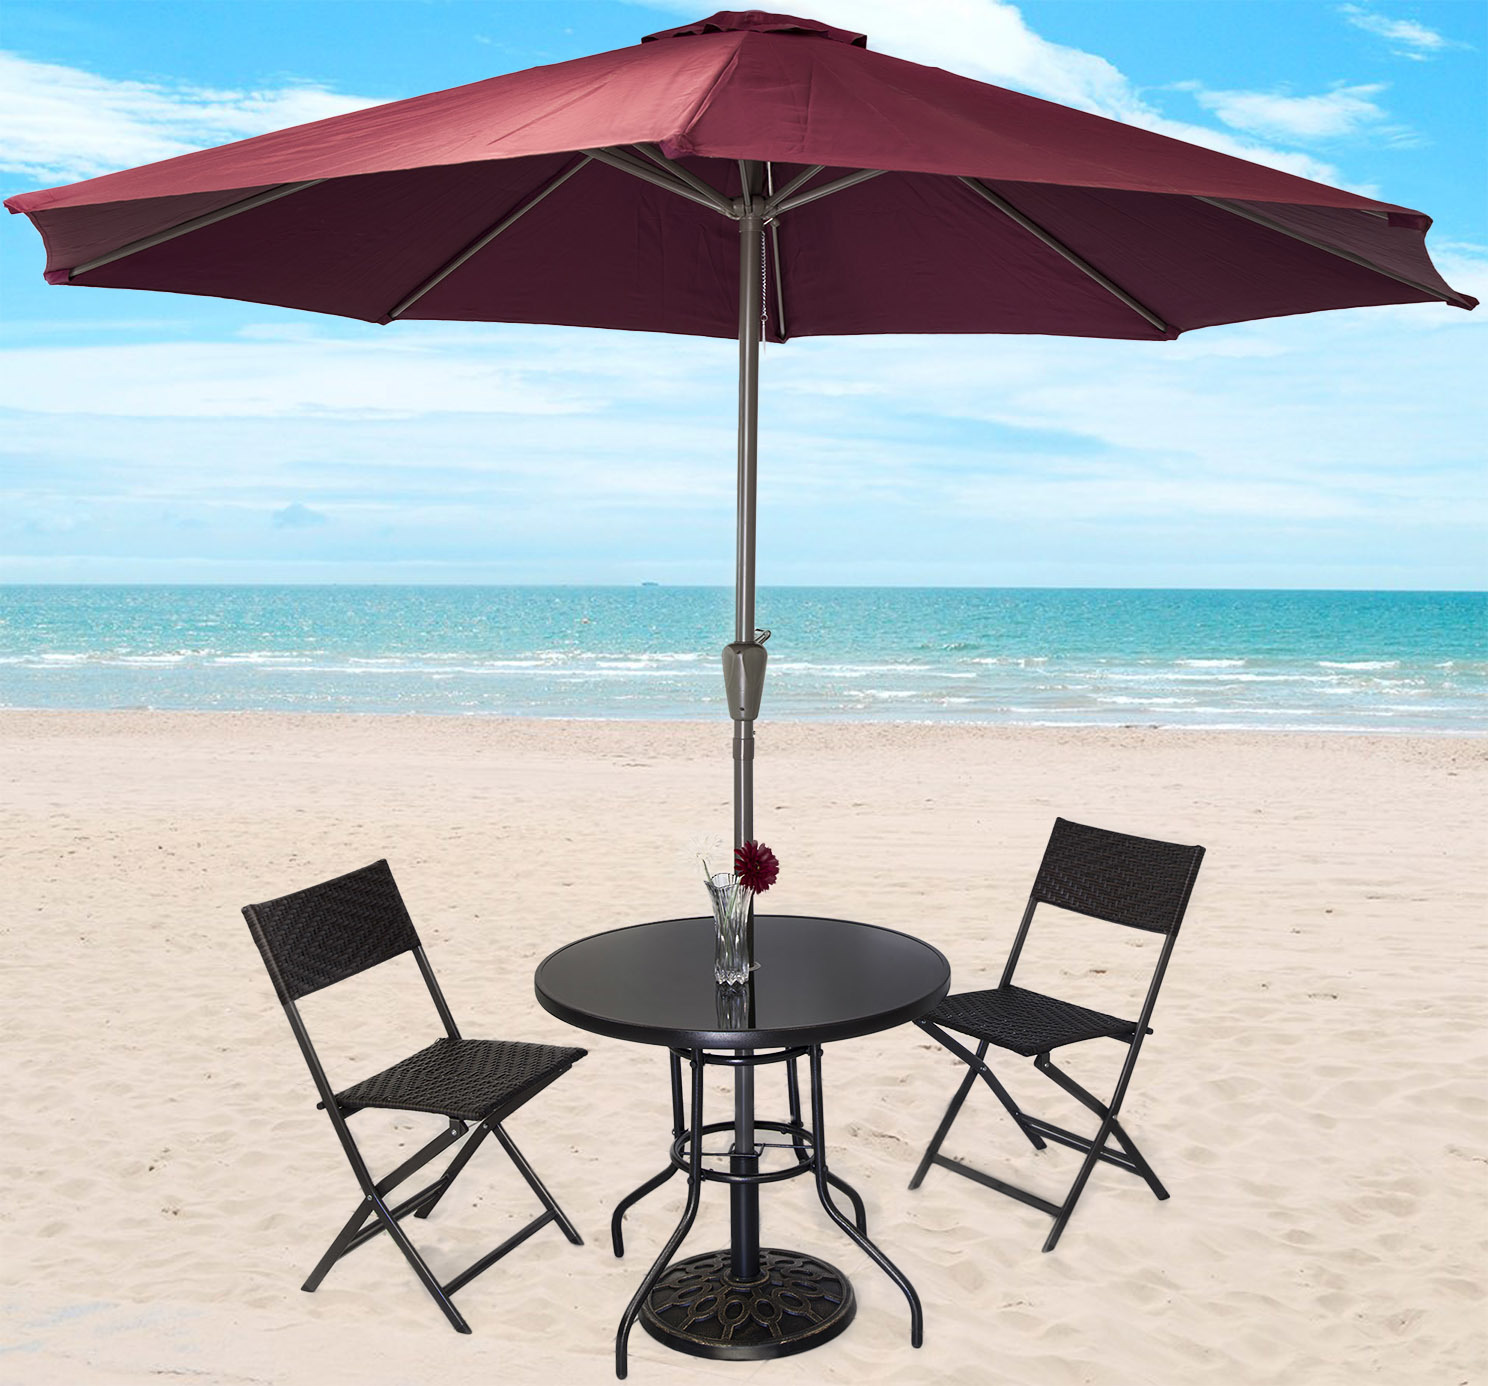 Alfresco 5PC Outdoor Setting (Maroon Umbrella & Stand, 2 Rattan Chairs, Round Table)